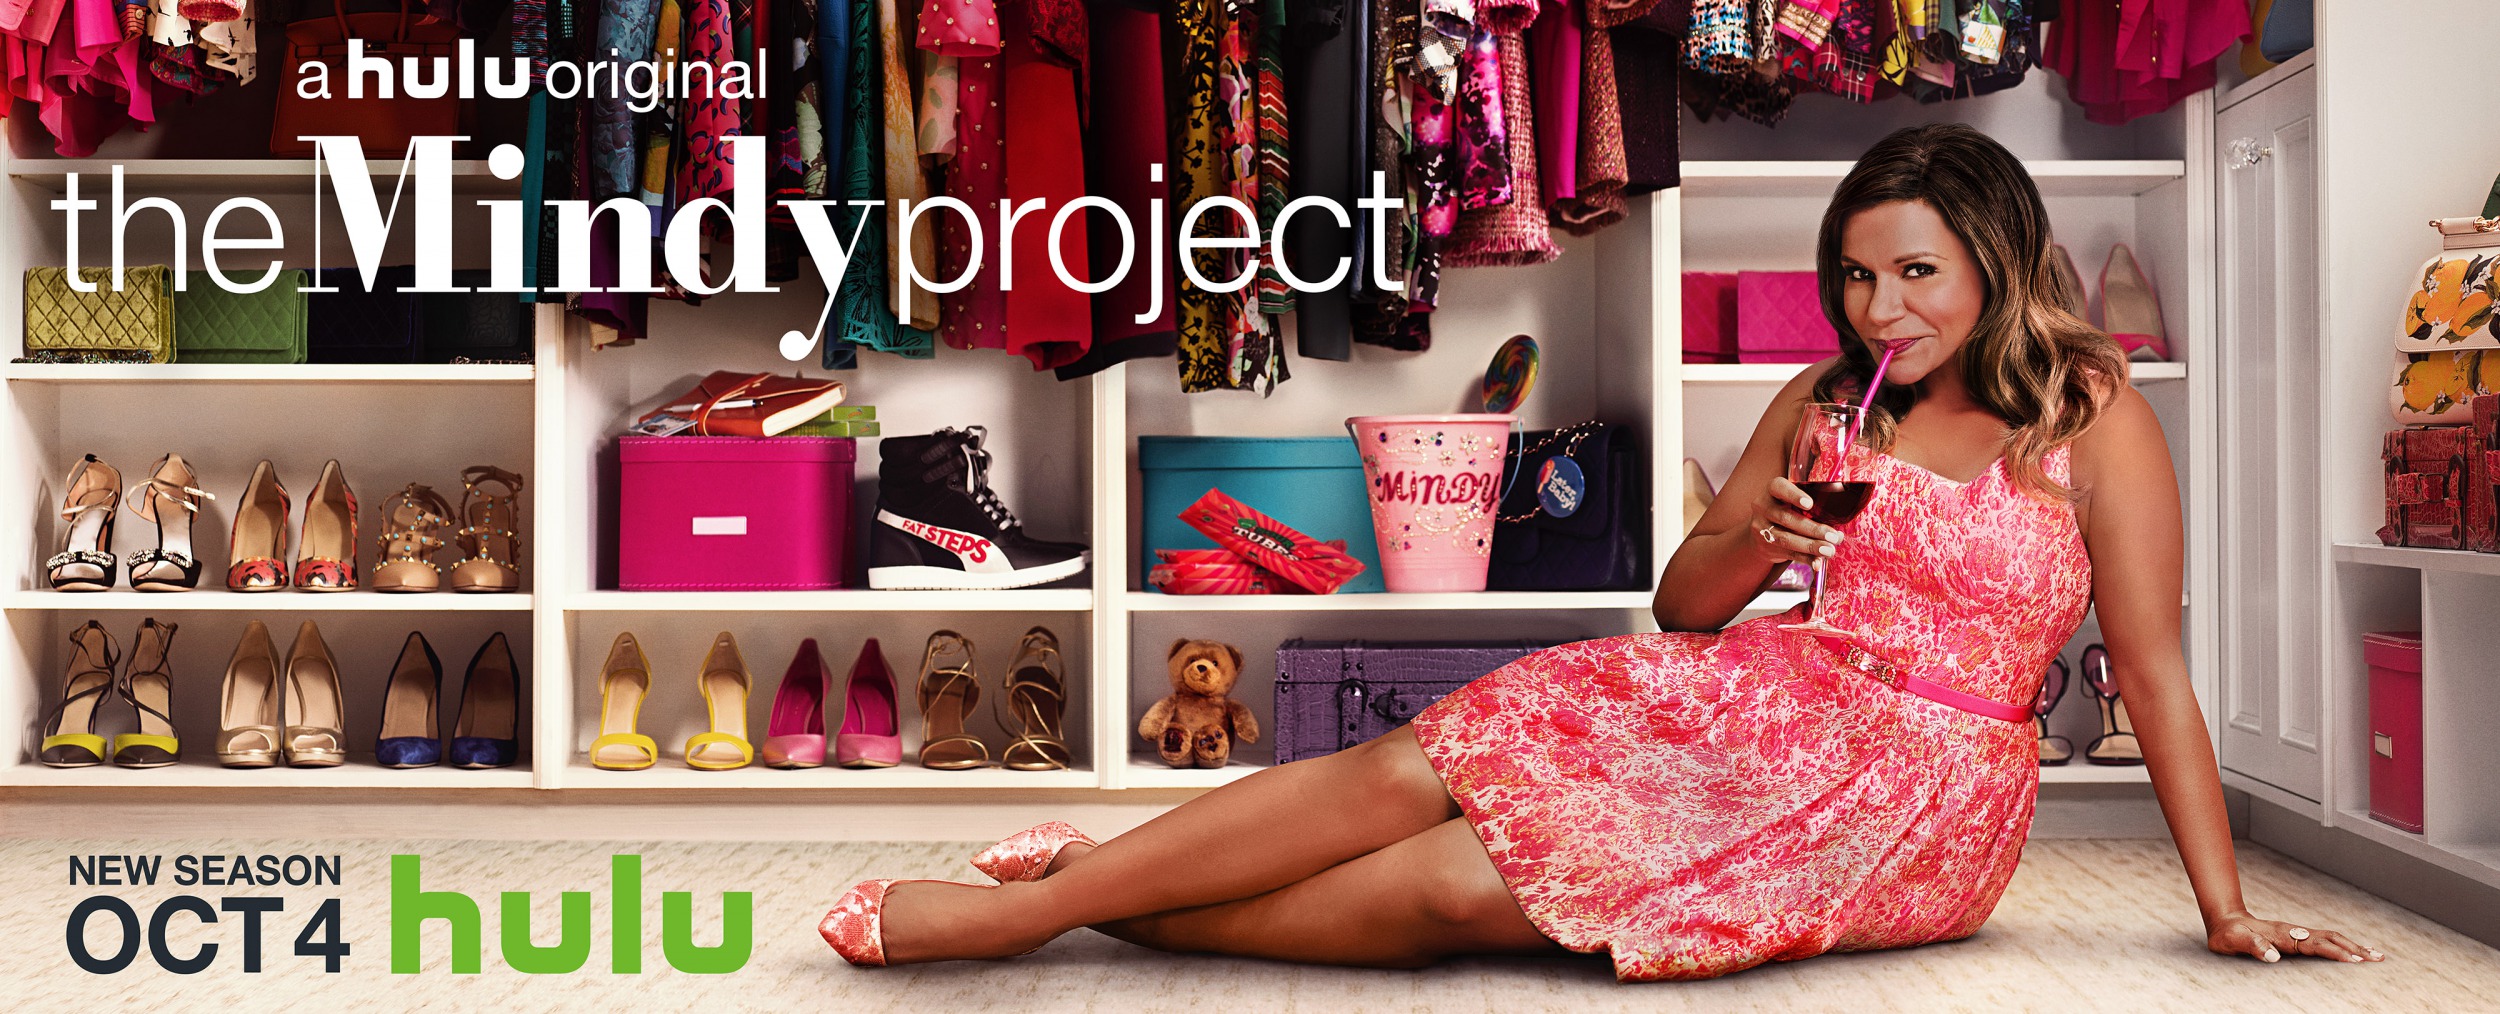 Mega Sized TV Poster Image for The Mindy Project (#8 of 10)